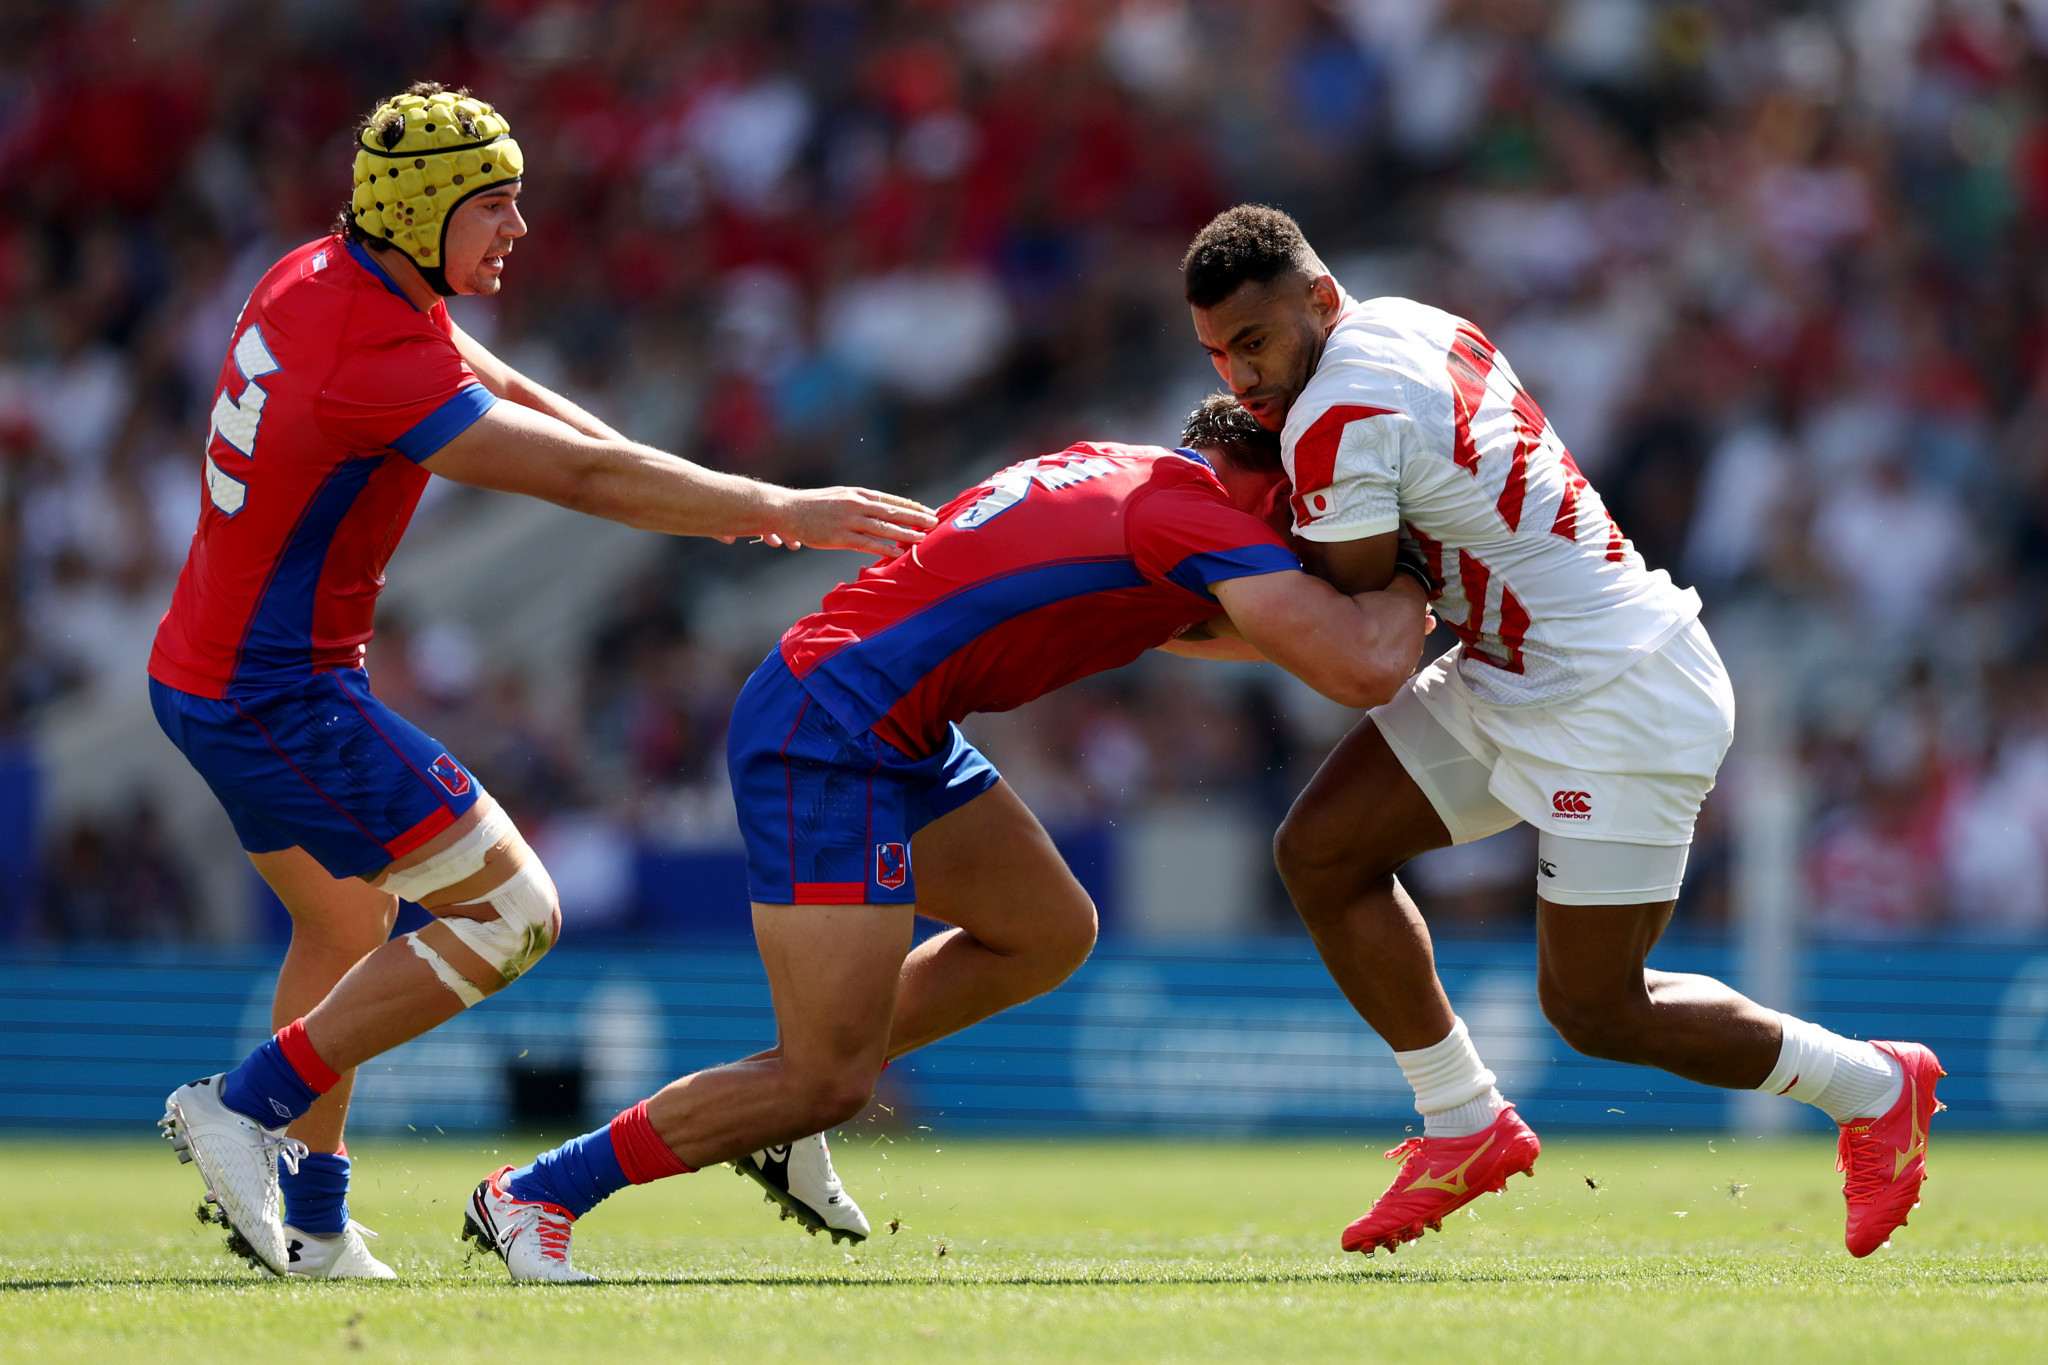 Japan proved too strong for Chile at the Stade Ernest Wallon in Toulouse ©Getty Images